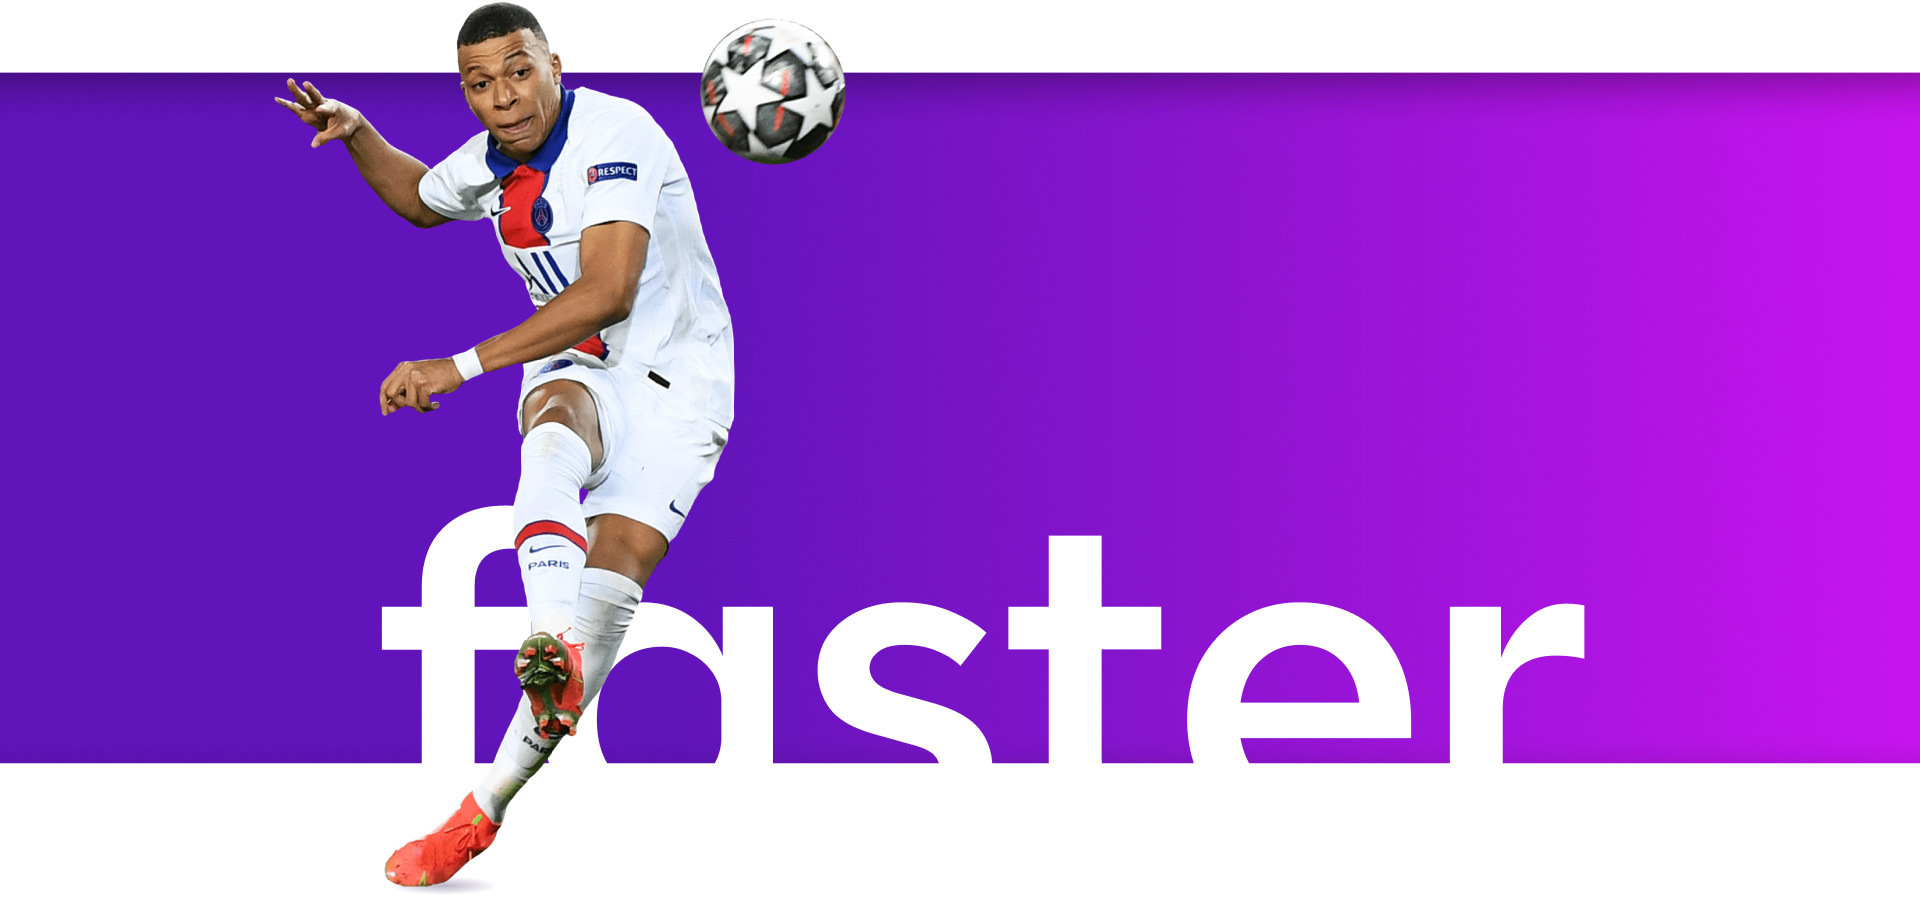 More streaming,less stressWatch players like Kylian Mbappé do their thing, with broadband that can keep up.